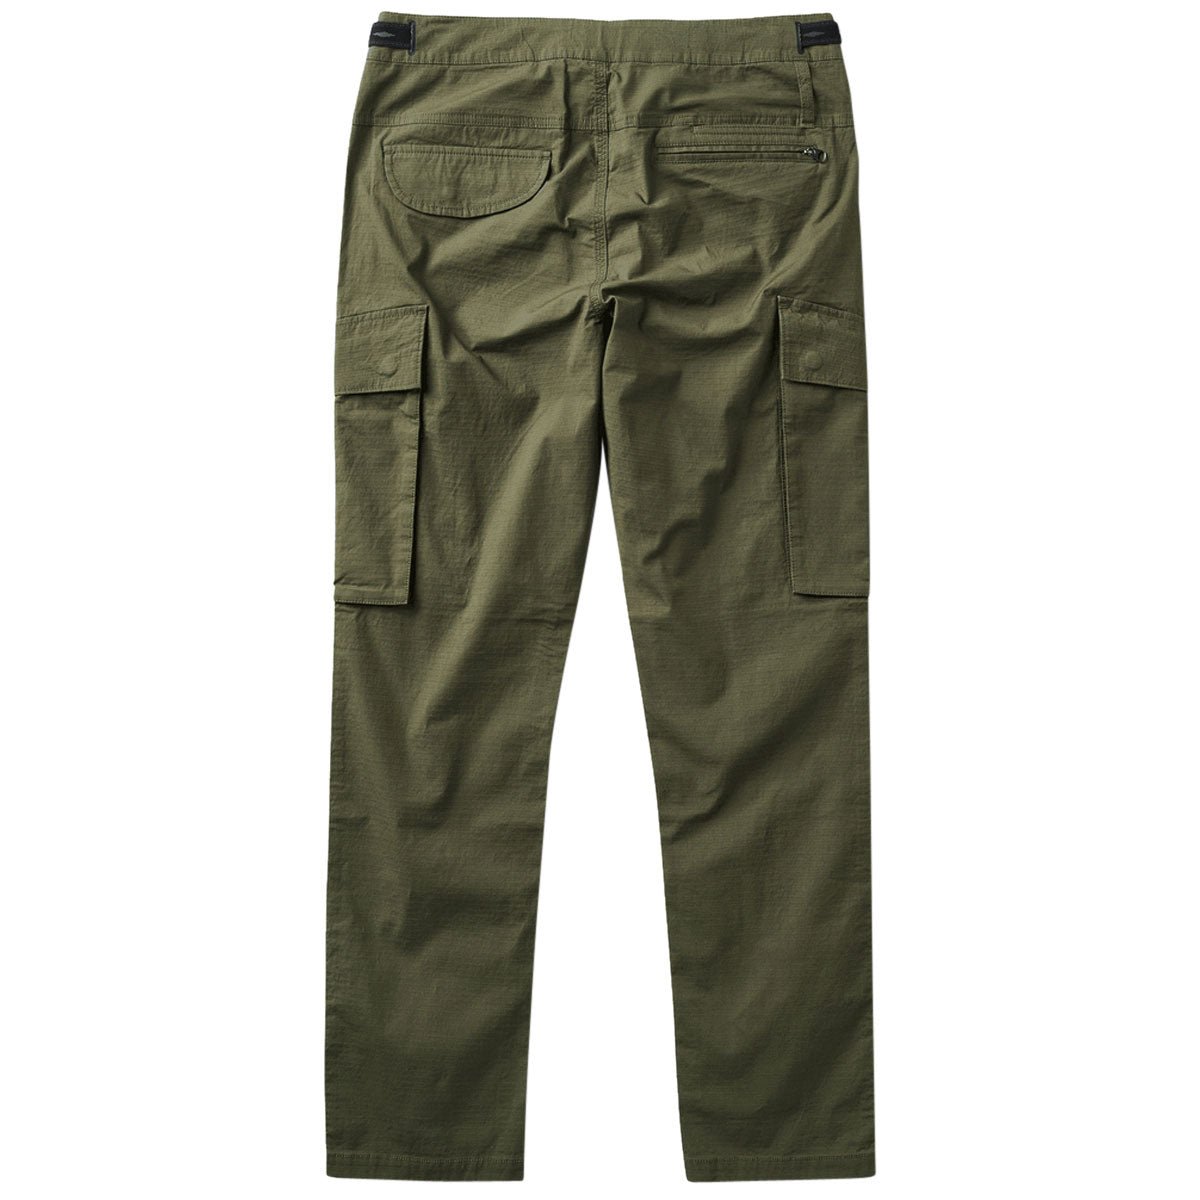 Roark Campover Cargo 2024 Pants - Military image 4